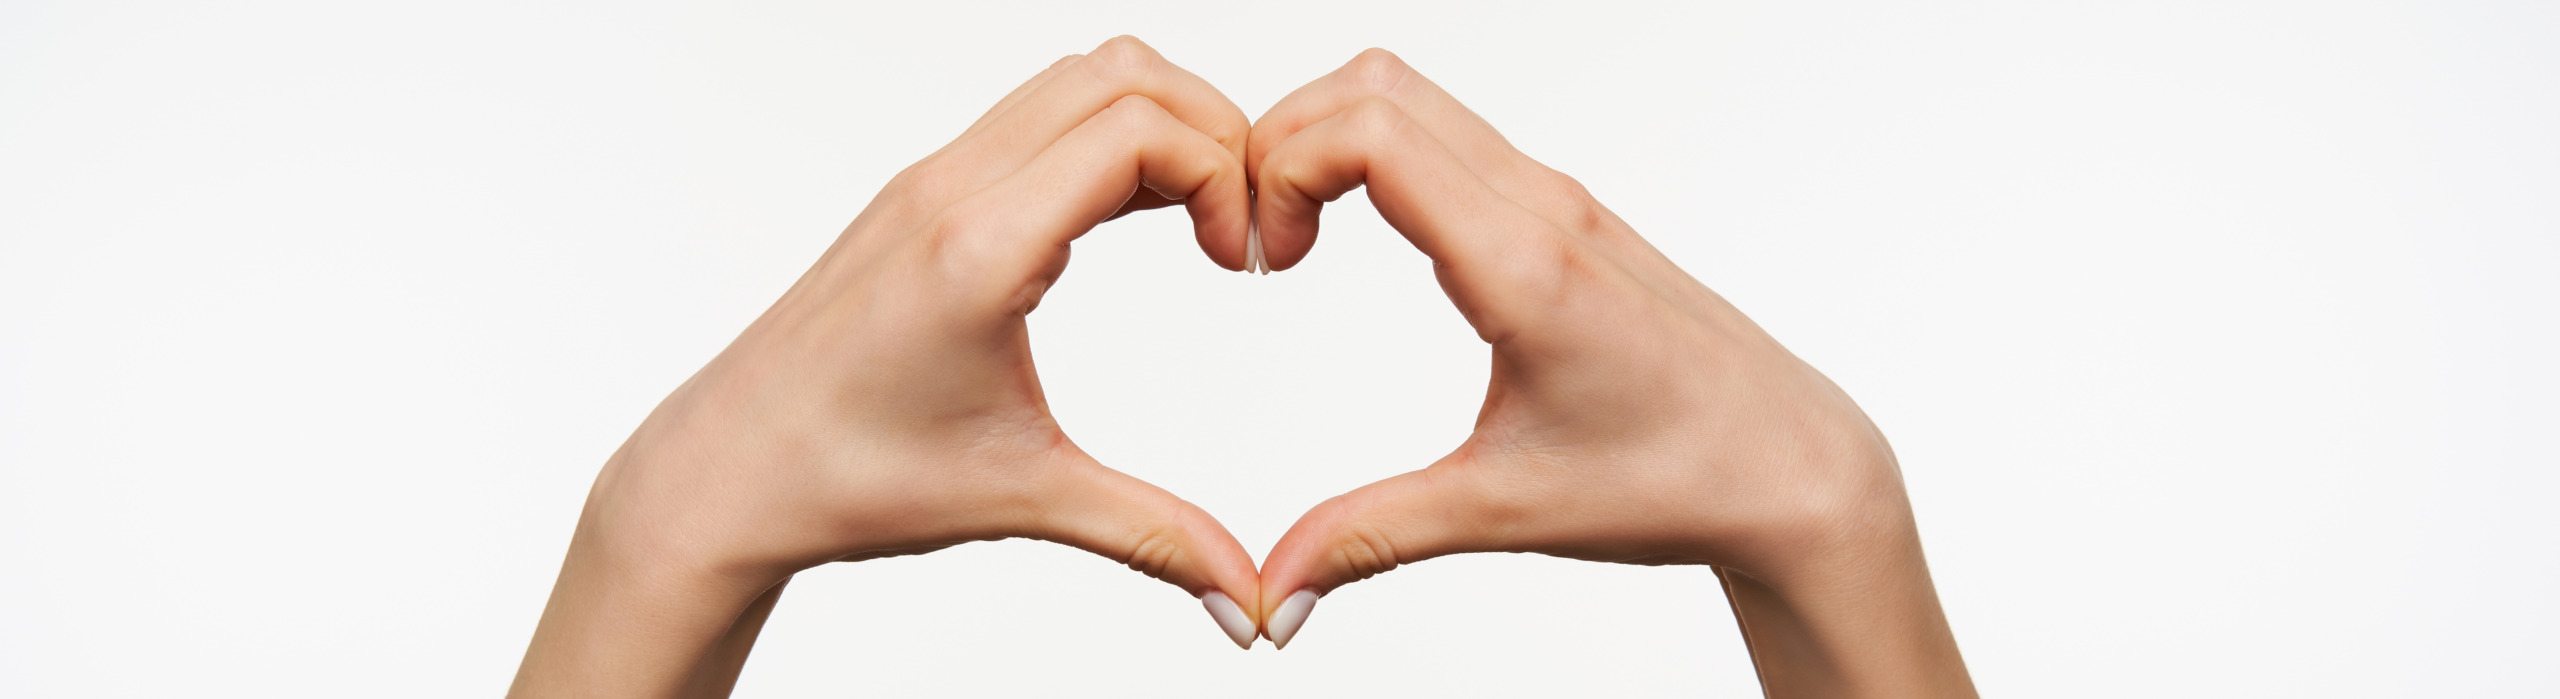 Studio photo of pretty female's hands folding together heart while young woman standing over white background. Language hand symbol viewed from side